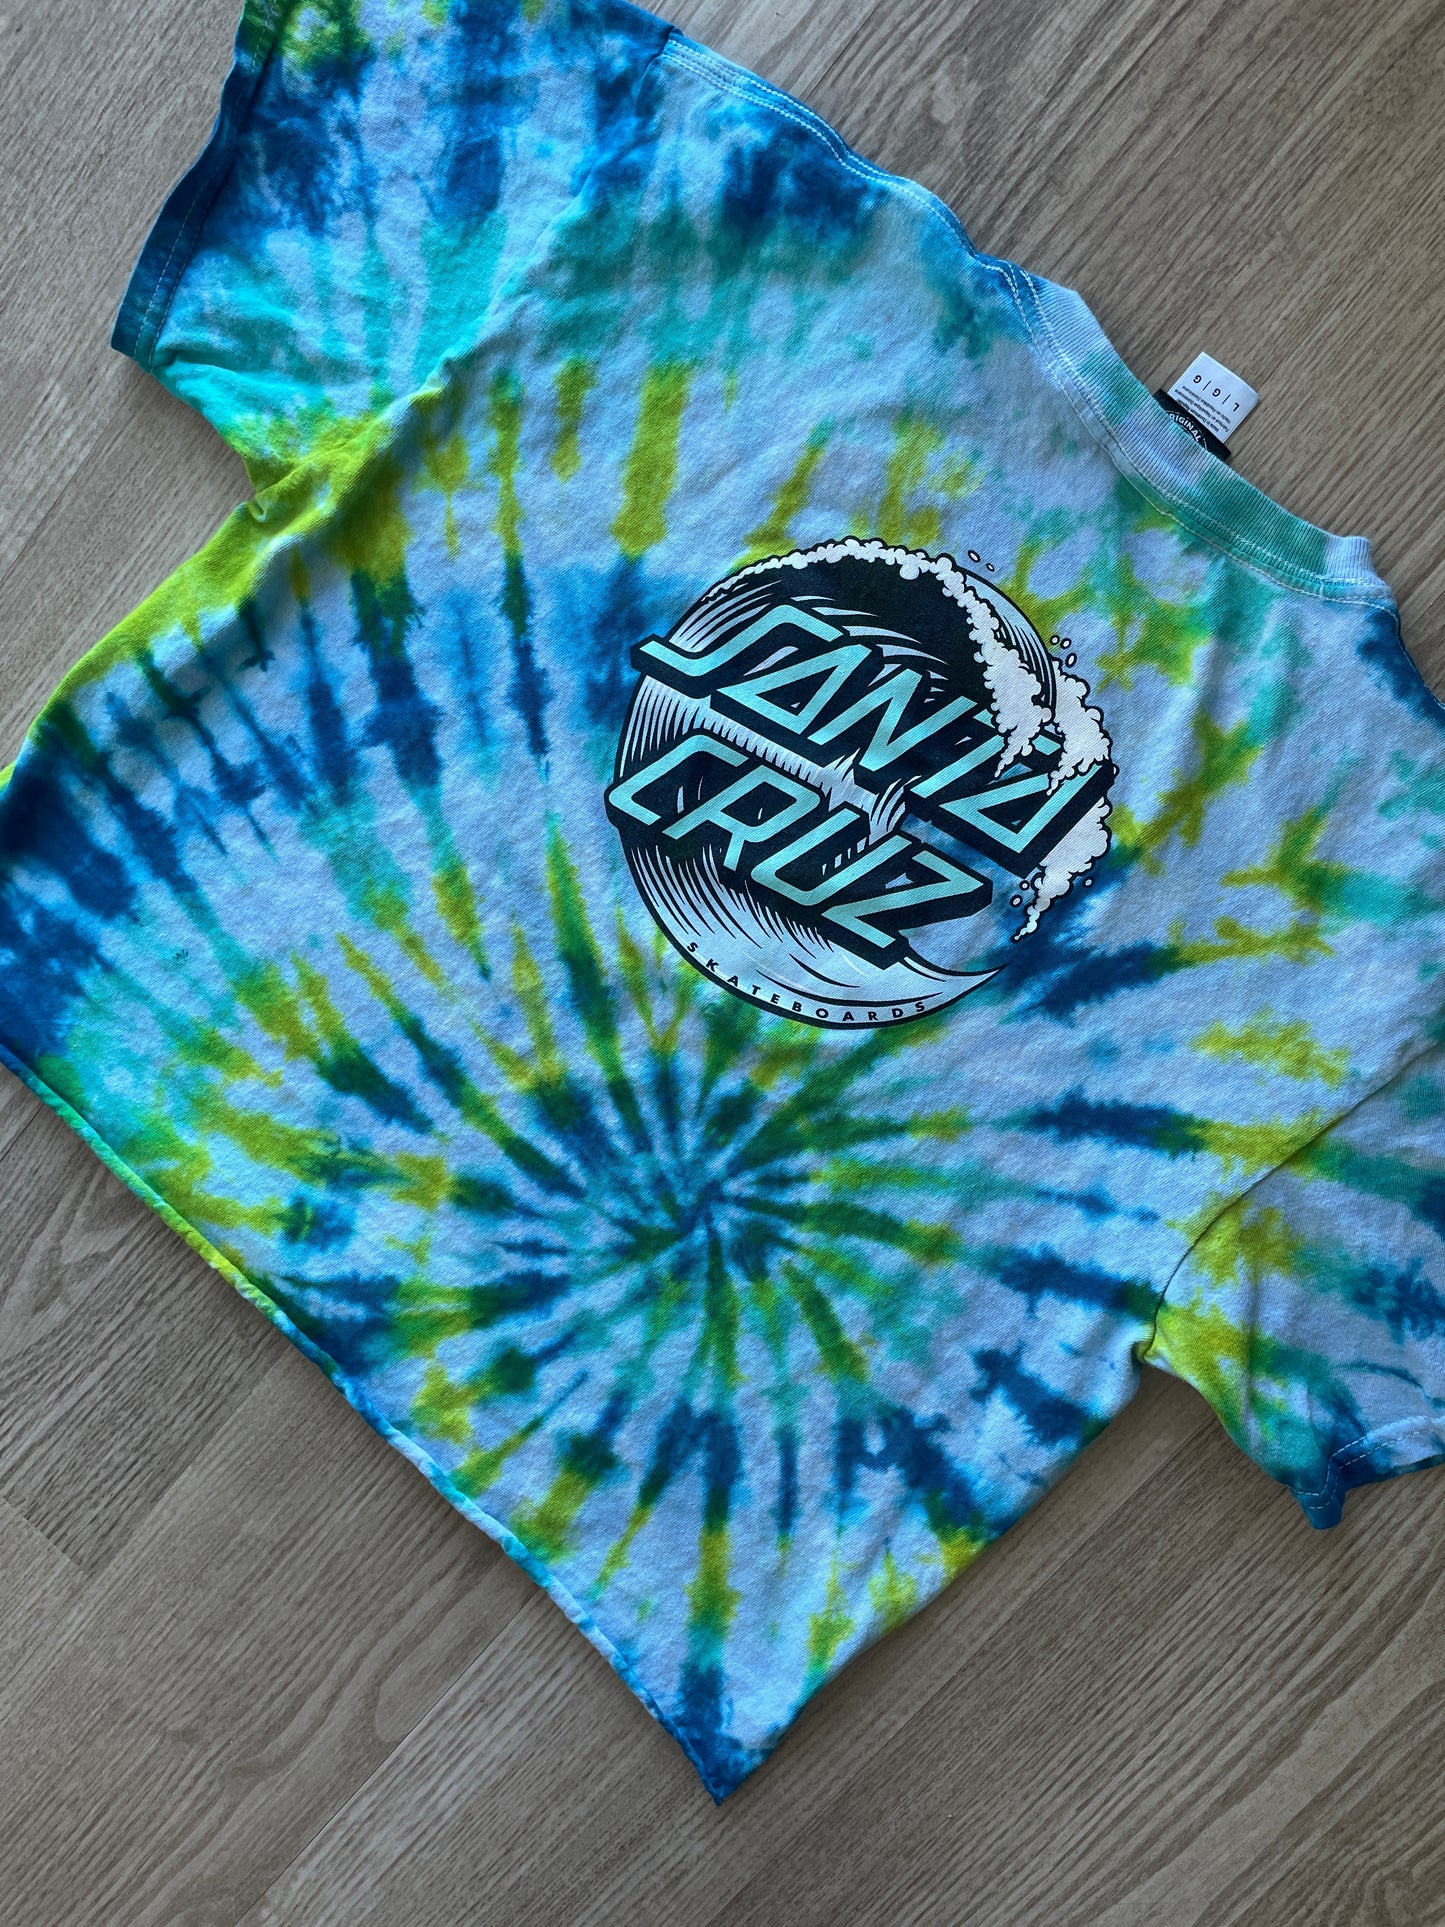 LARGE Men’s Santa Cruz Tie Dye Short Sleeve Crop Top | One-Of-a-Kind Upcycled Green and Blue Spiral Top